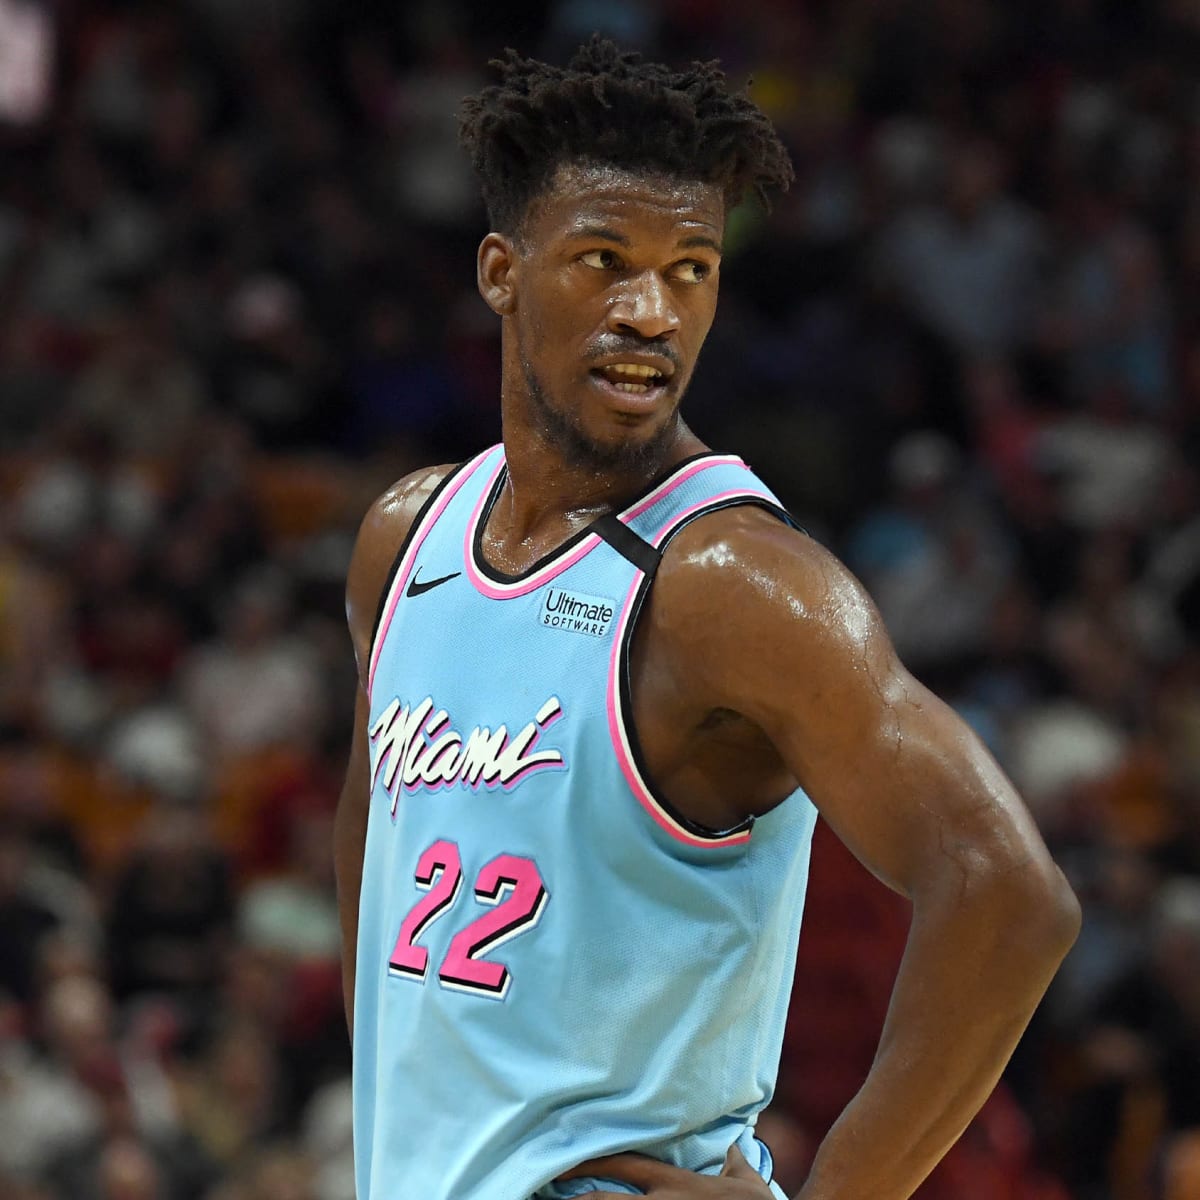 Jimmy Butler and Miami Heat surprise 12-year-old Felipe from